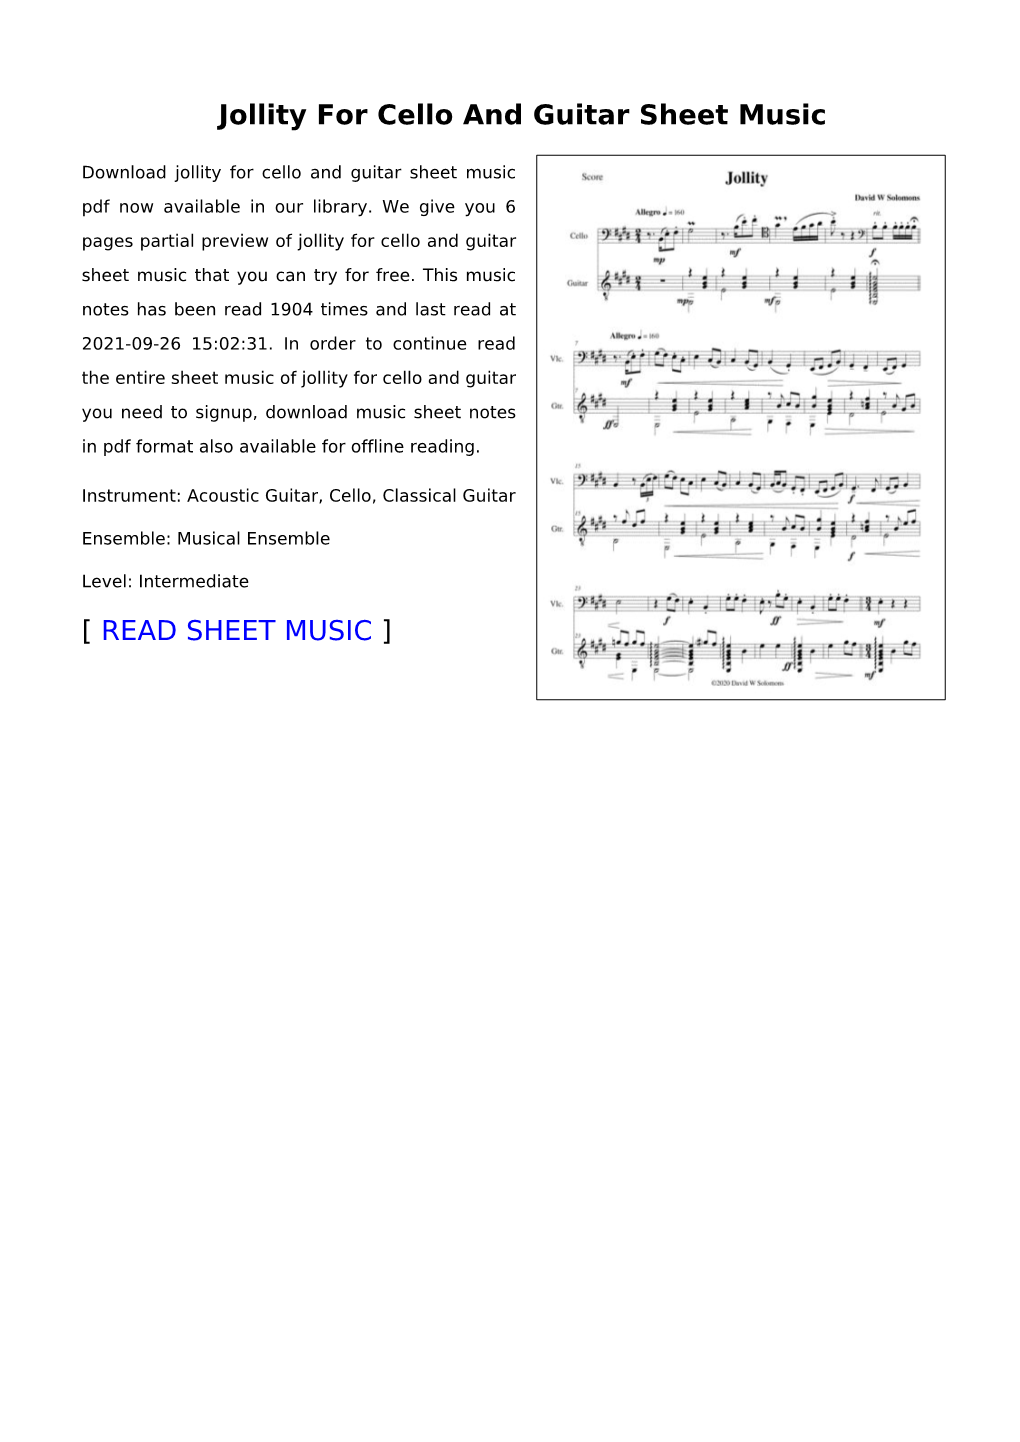 Jollity for Cello and Guitar Sheet Music